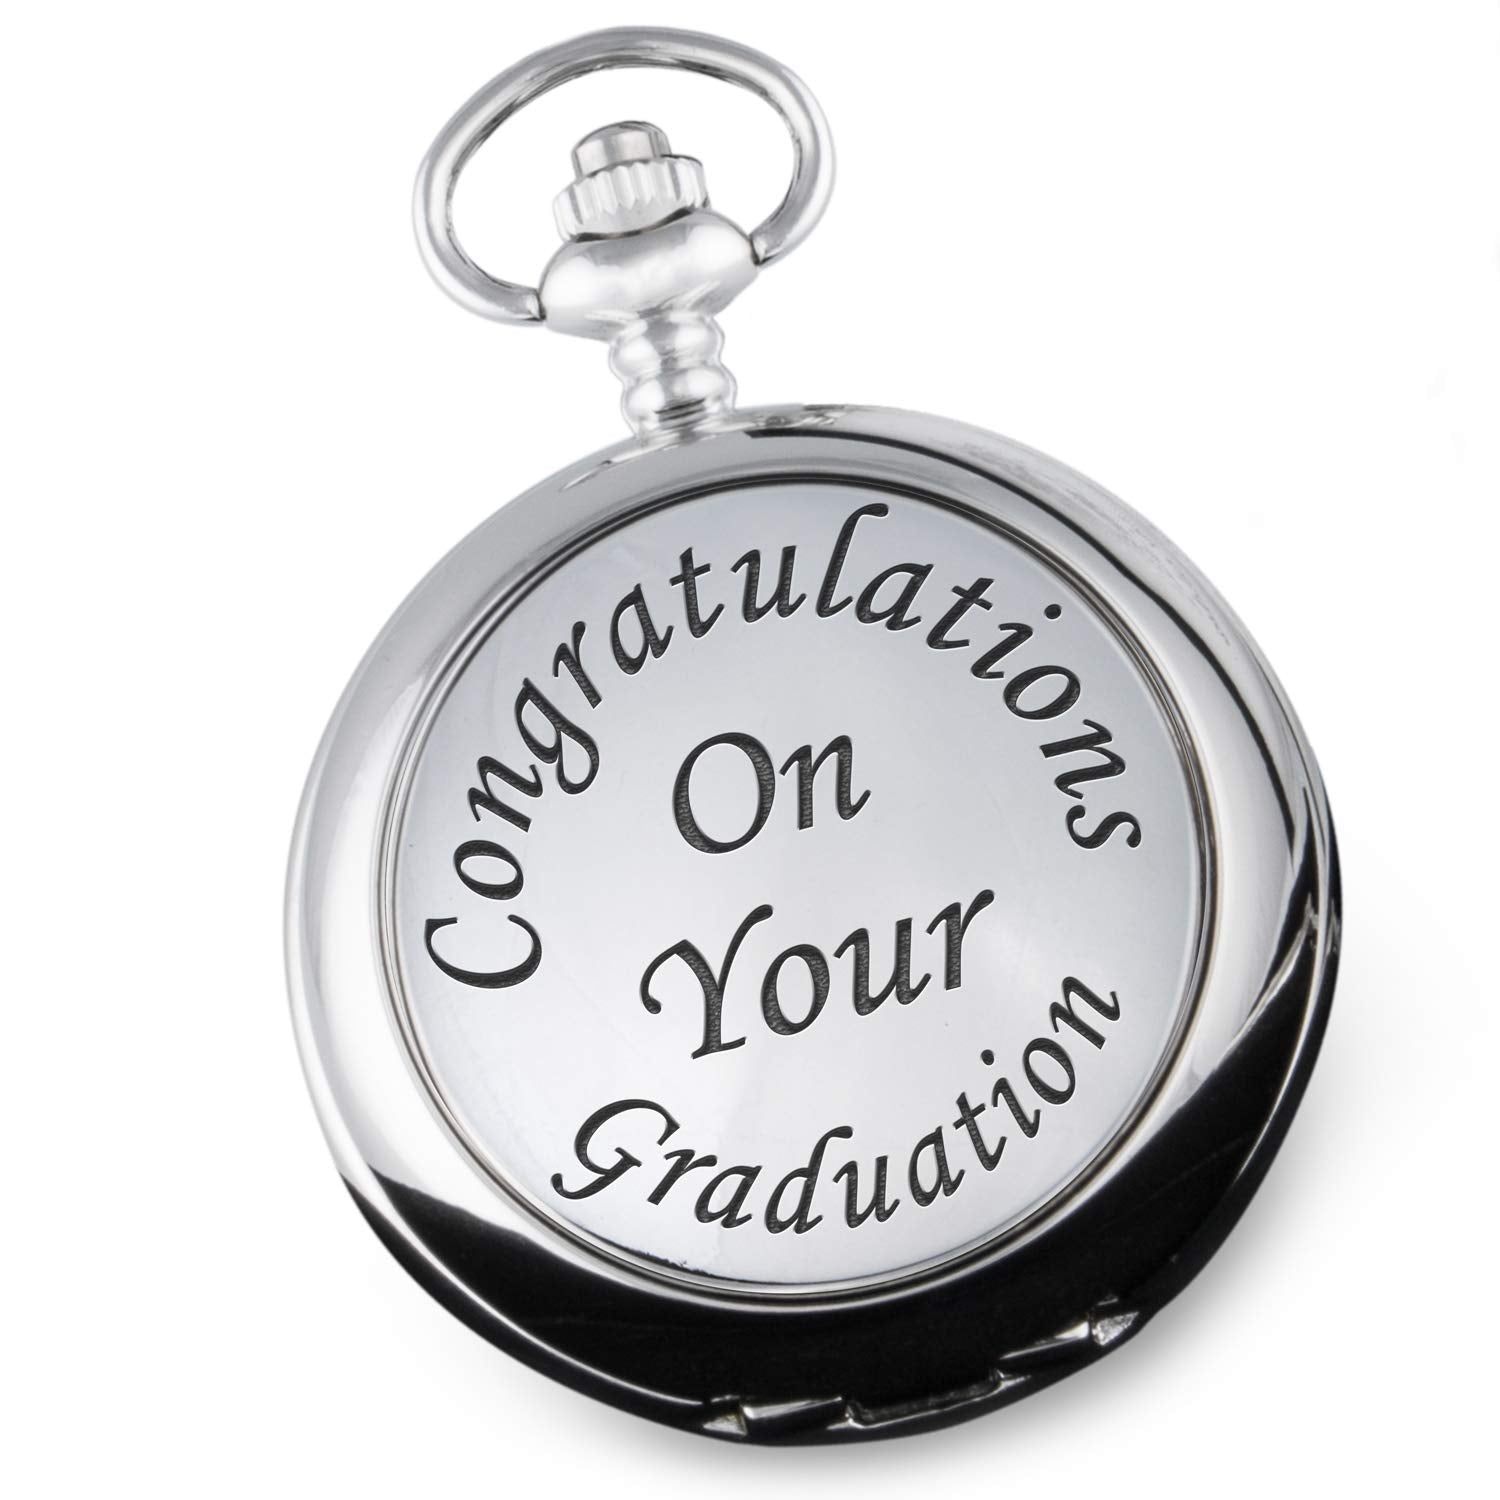 Mens Graduation Pocket Watch Gift Graduate Gifts for Him Son Brother